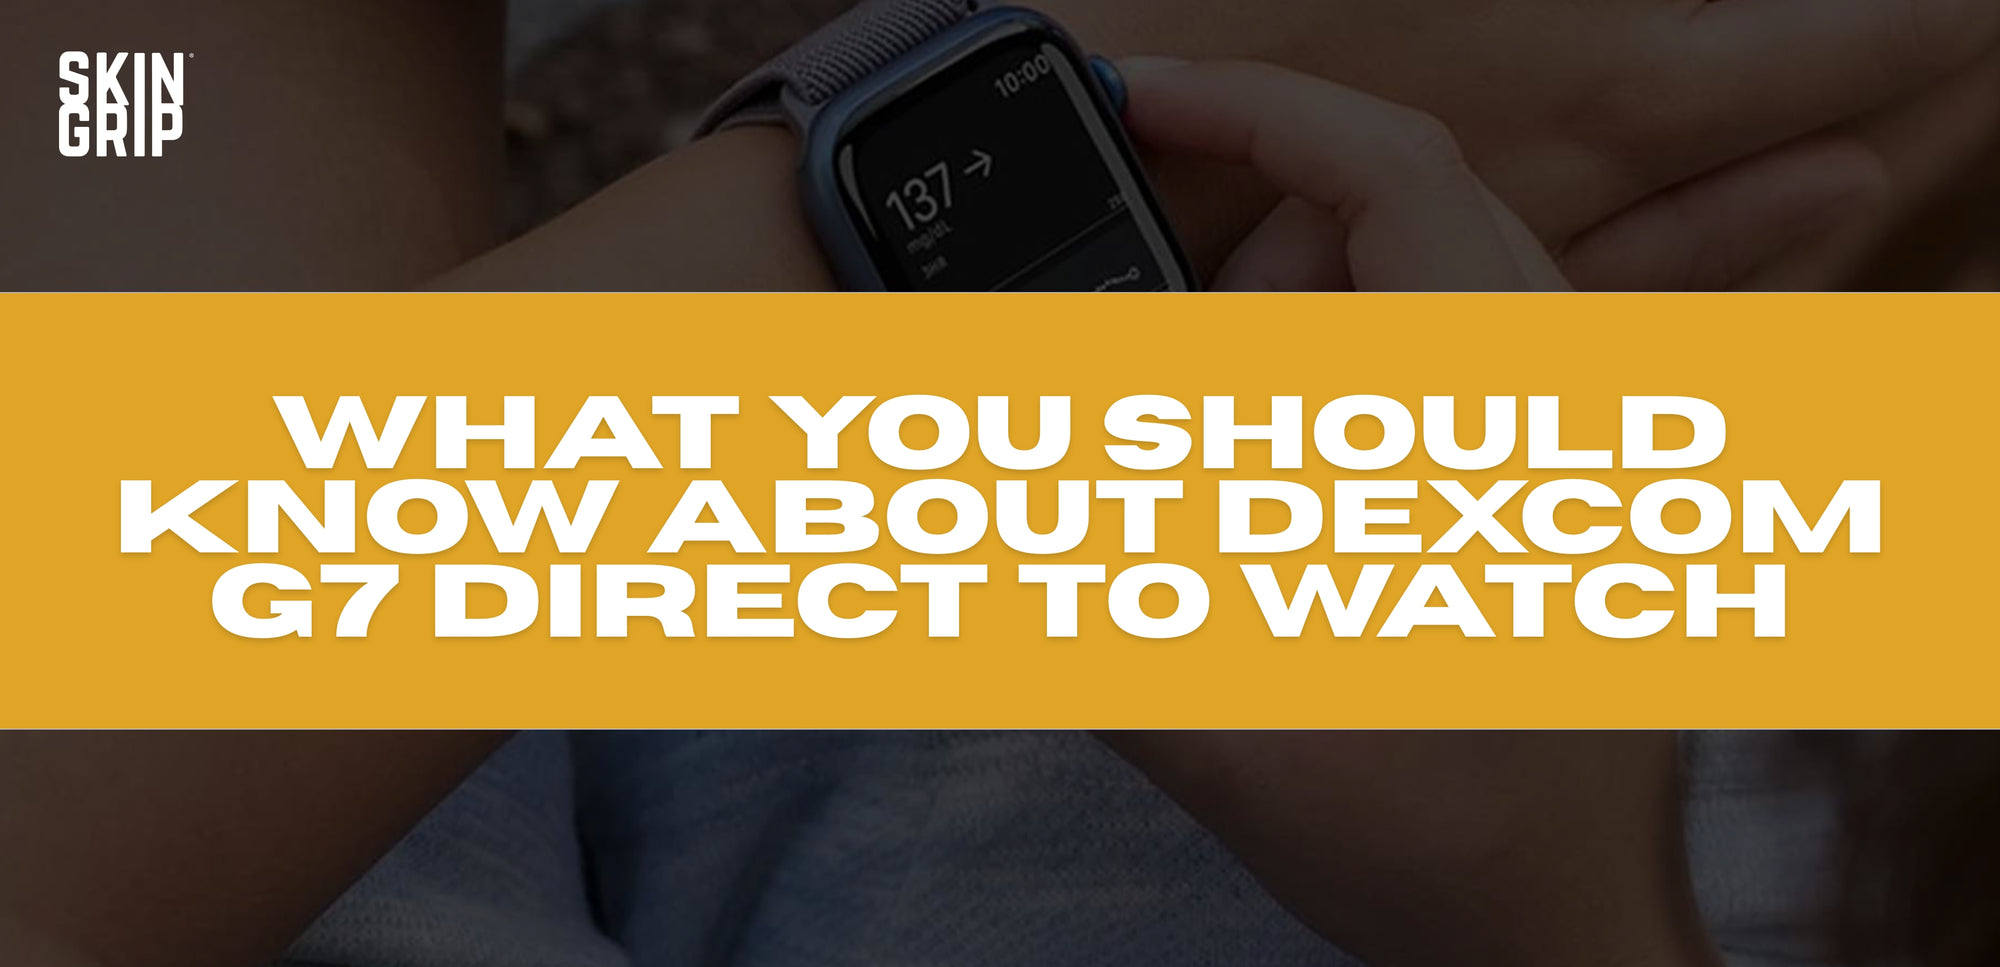 What You Should Know About Dexcom G7 Direct to Watch